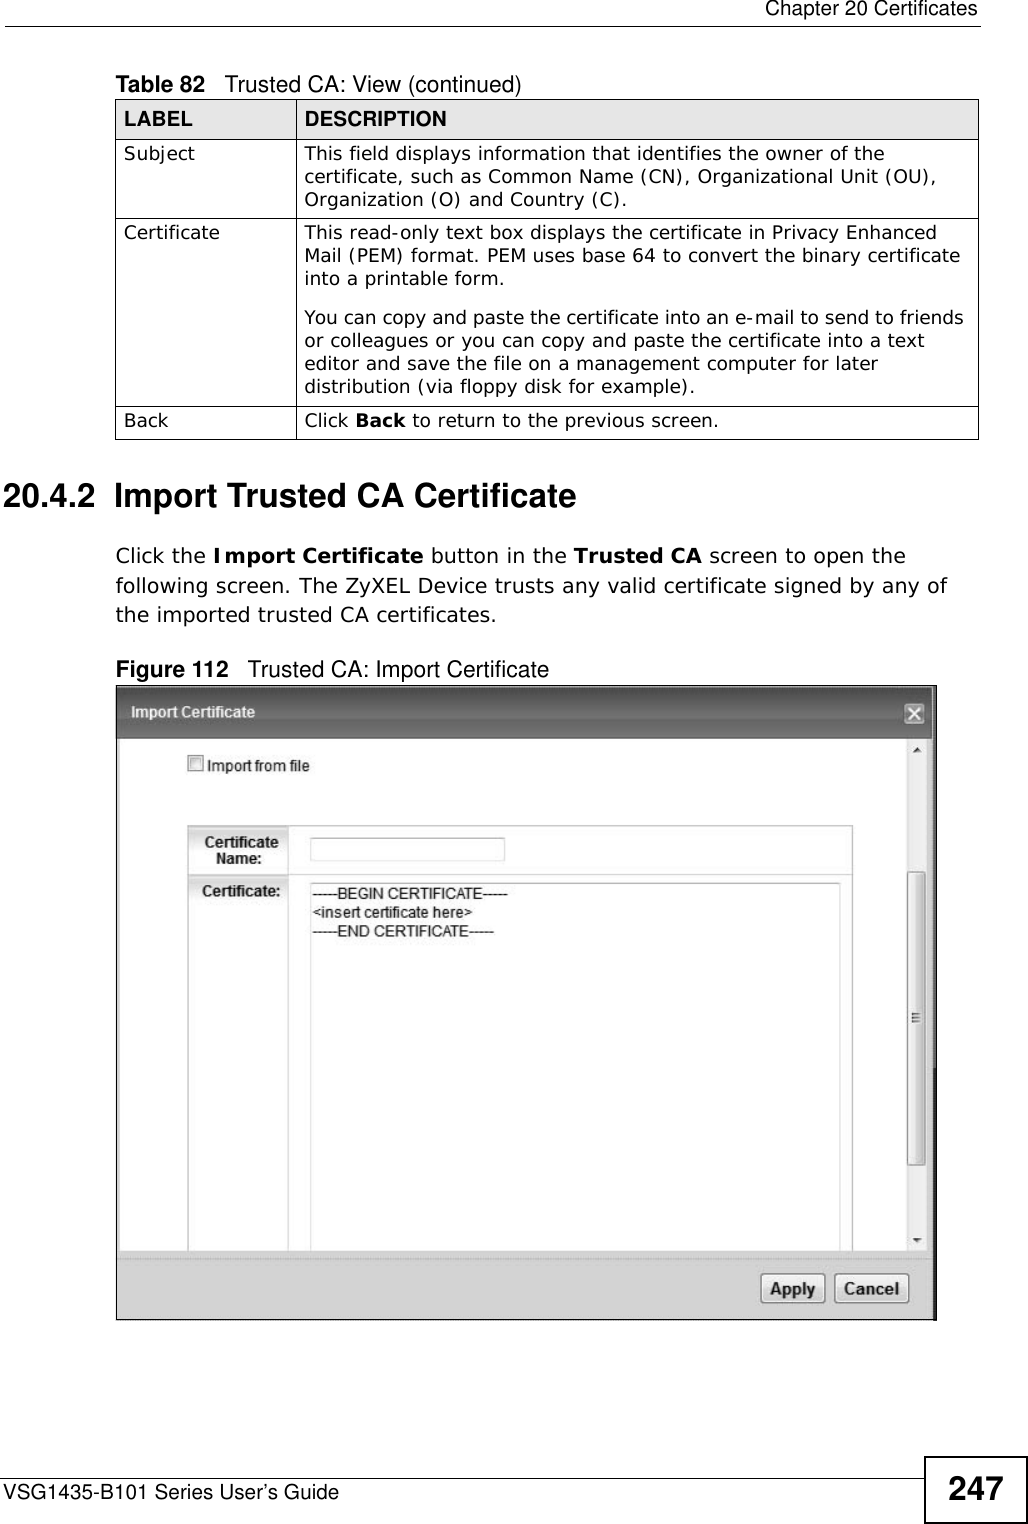  Chapter 20 CertificatesVSG1435-B101 Series User’s Guide 24720.4.2  Import Trusted CA CertificateClick the Import Certificate button in the Trusted CA screen to open the following screen. The ZyXEL Device trusts any valid certificate signed by any of the imported trusted CA certificates.Figure 112   Trusted CA: Import Certificate Subject This field displays information that identifies the owner of the certificate, such as Common Name (CN), Organizational Unit (OU), Organization (O) and Country (C).Certificate This read-only text box displays the certificate in Privacy Enhanced Mail (PEM) format. PEM uses base 64 to convert the binary certificate into a printable form. You can copy and paste the certificate into an e-mail to send to friends or colleagues or you can copy and paste the certificate into a text editor and save the file on a management computer for later distribution (via floppy disk for example).Back Click Back to return to the previous screen.Table 82   Trusted CA: View (continued)LABEL DESCRIPTION